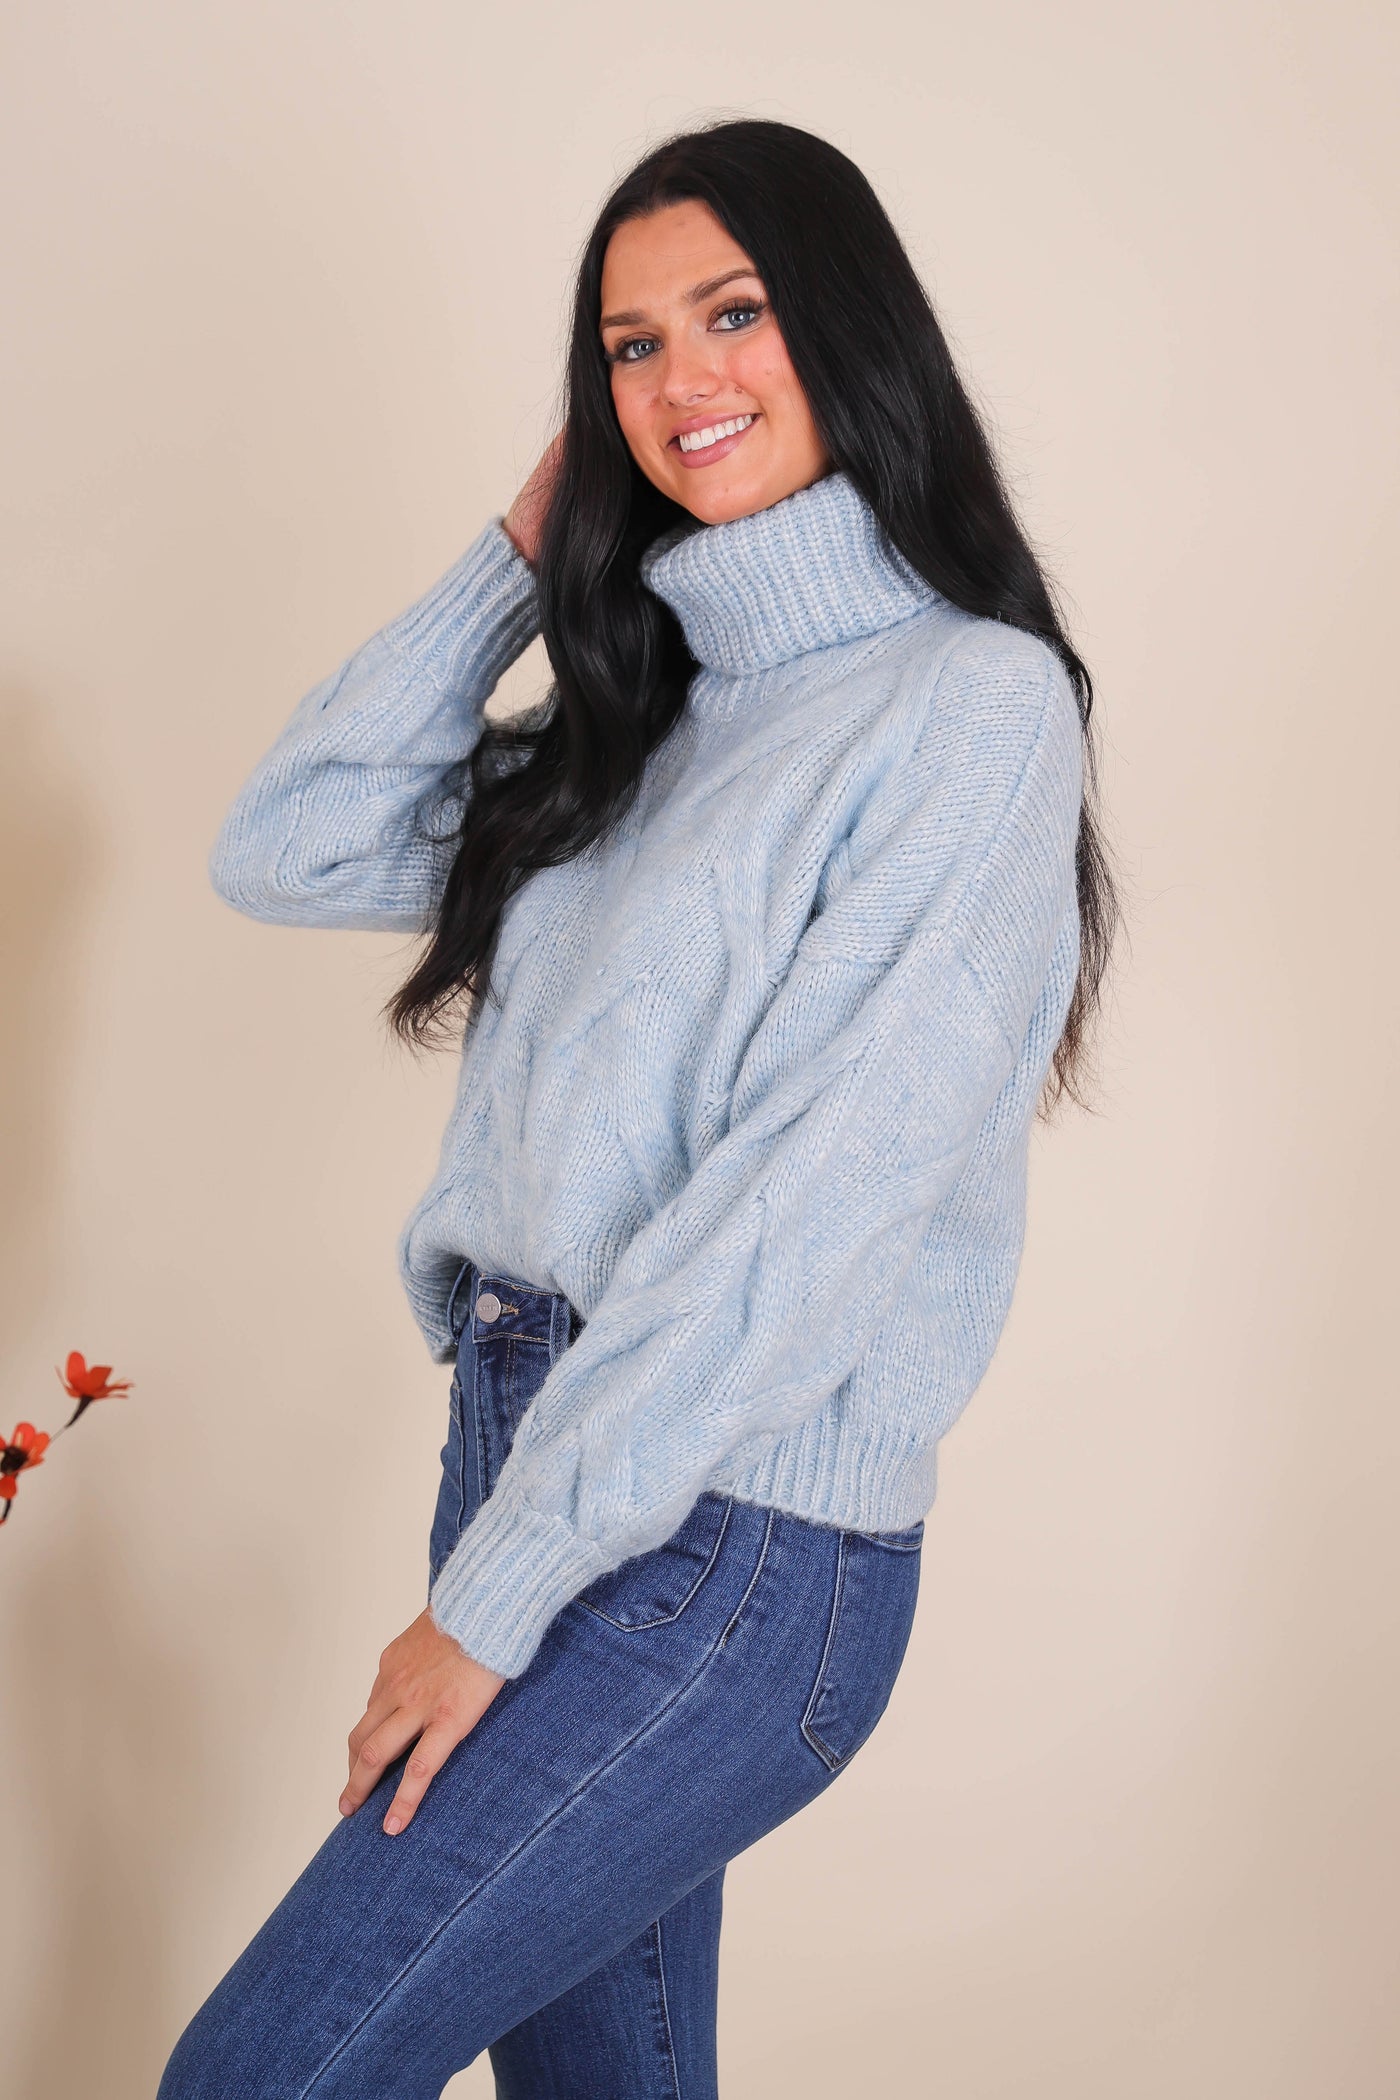 Cozy Cable Knit Sweater- Women's Chunky Oversized Sweater- She + Sky Sweaters